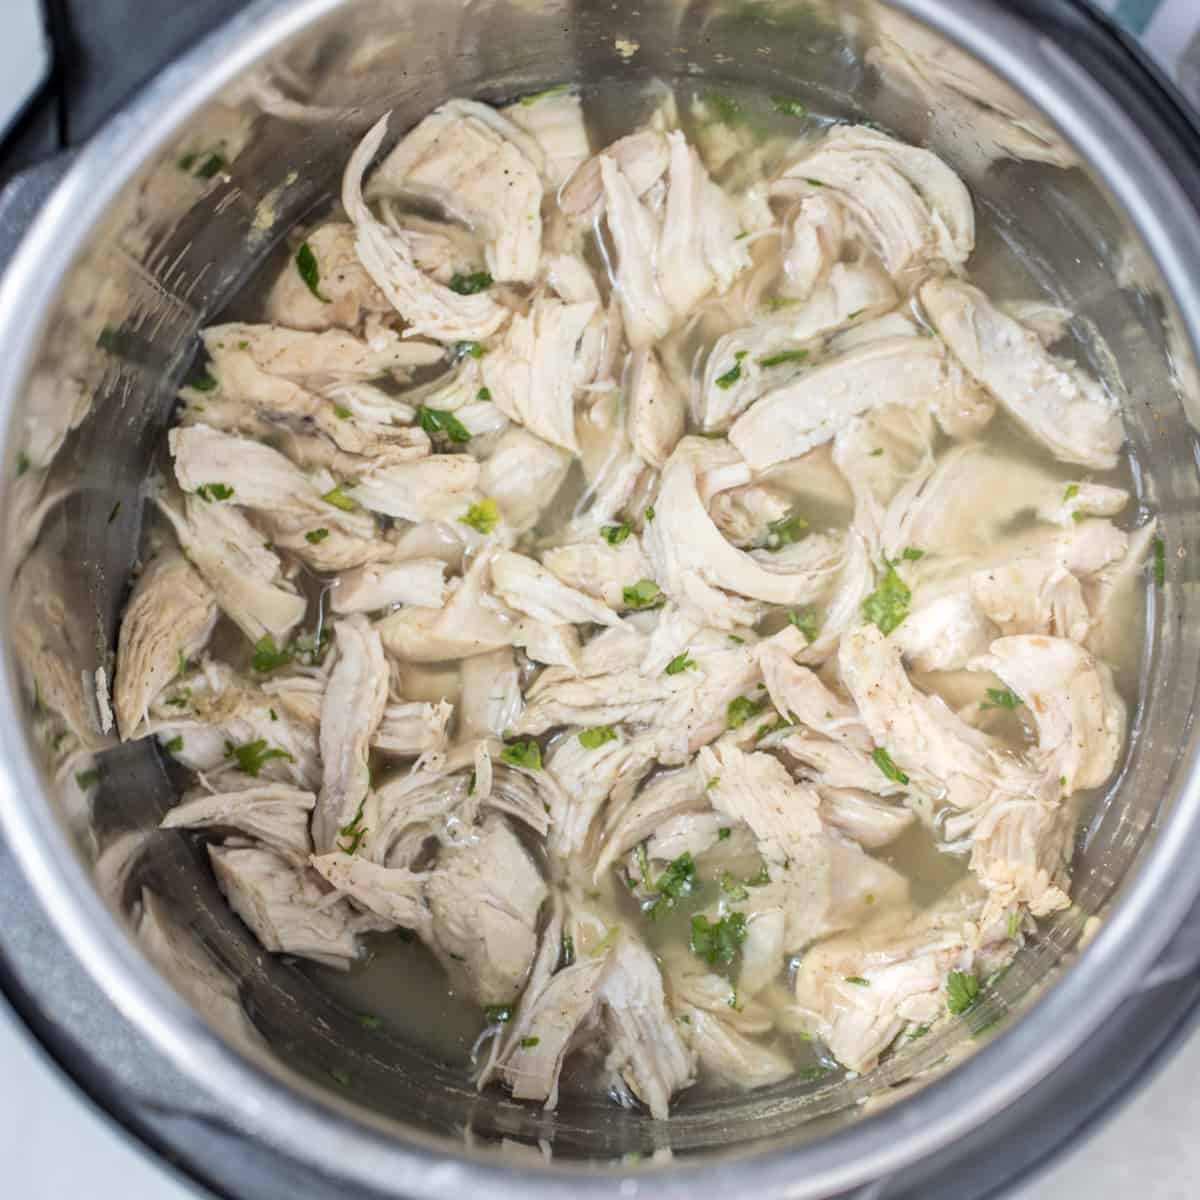 Instant Pot With shredded chicken inside.